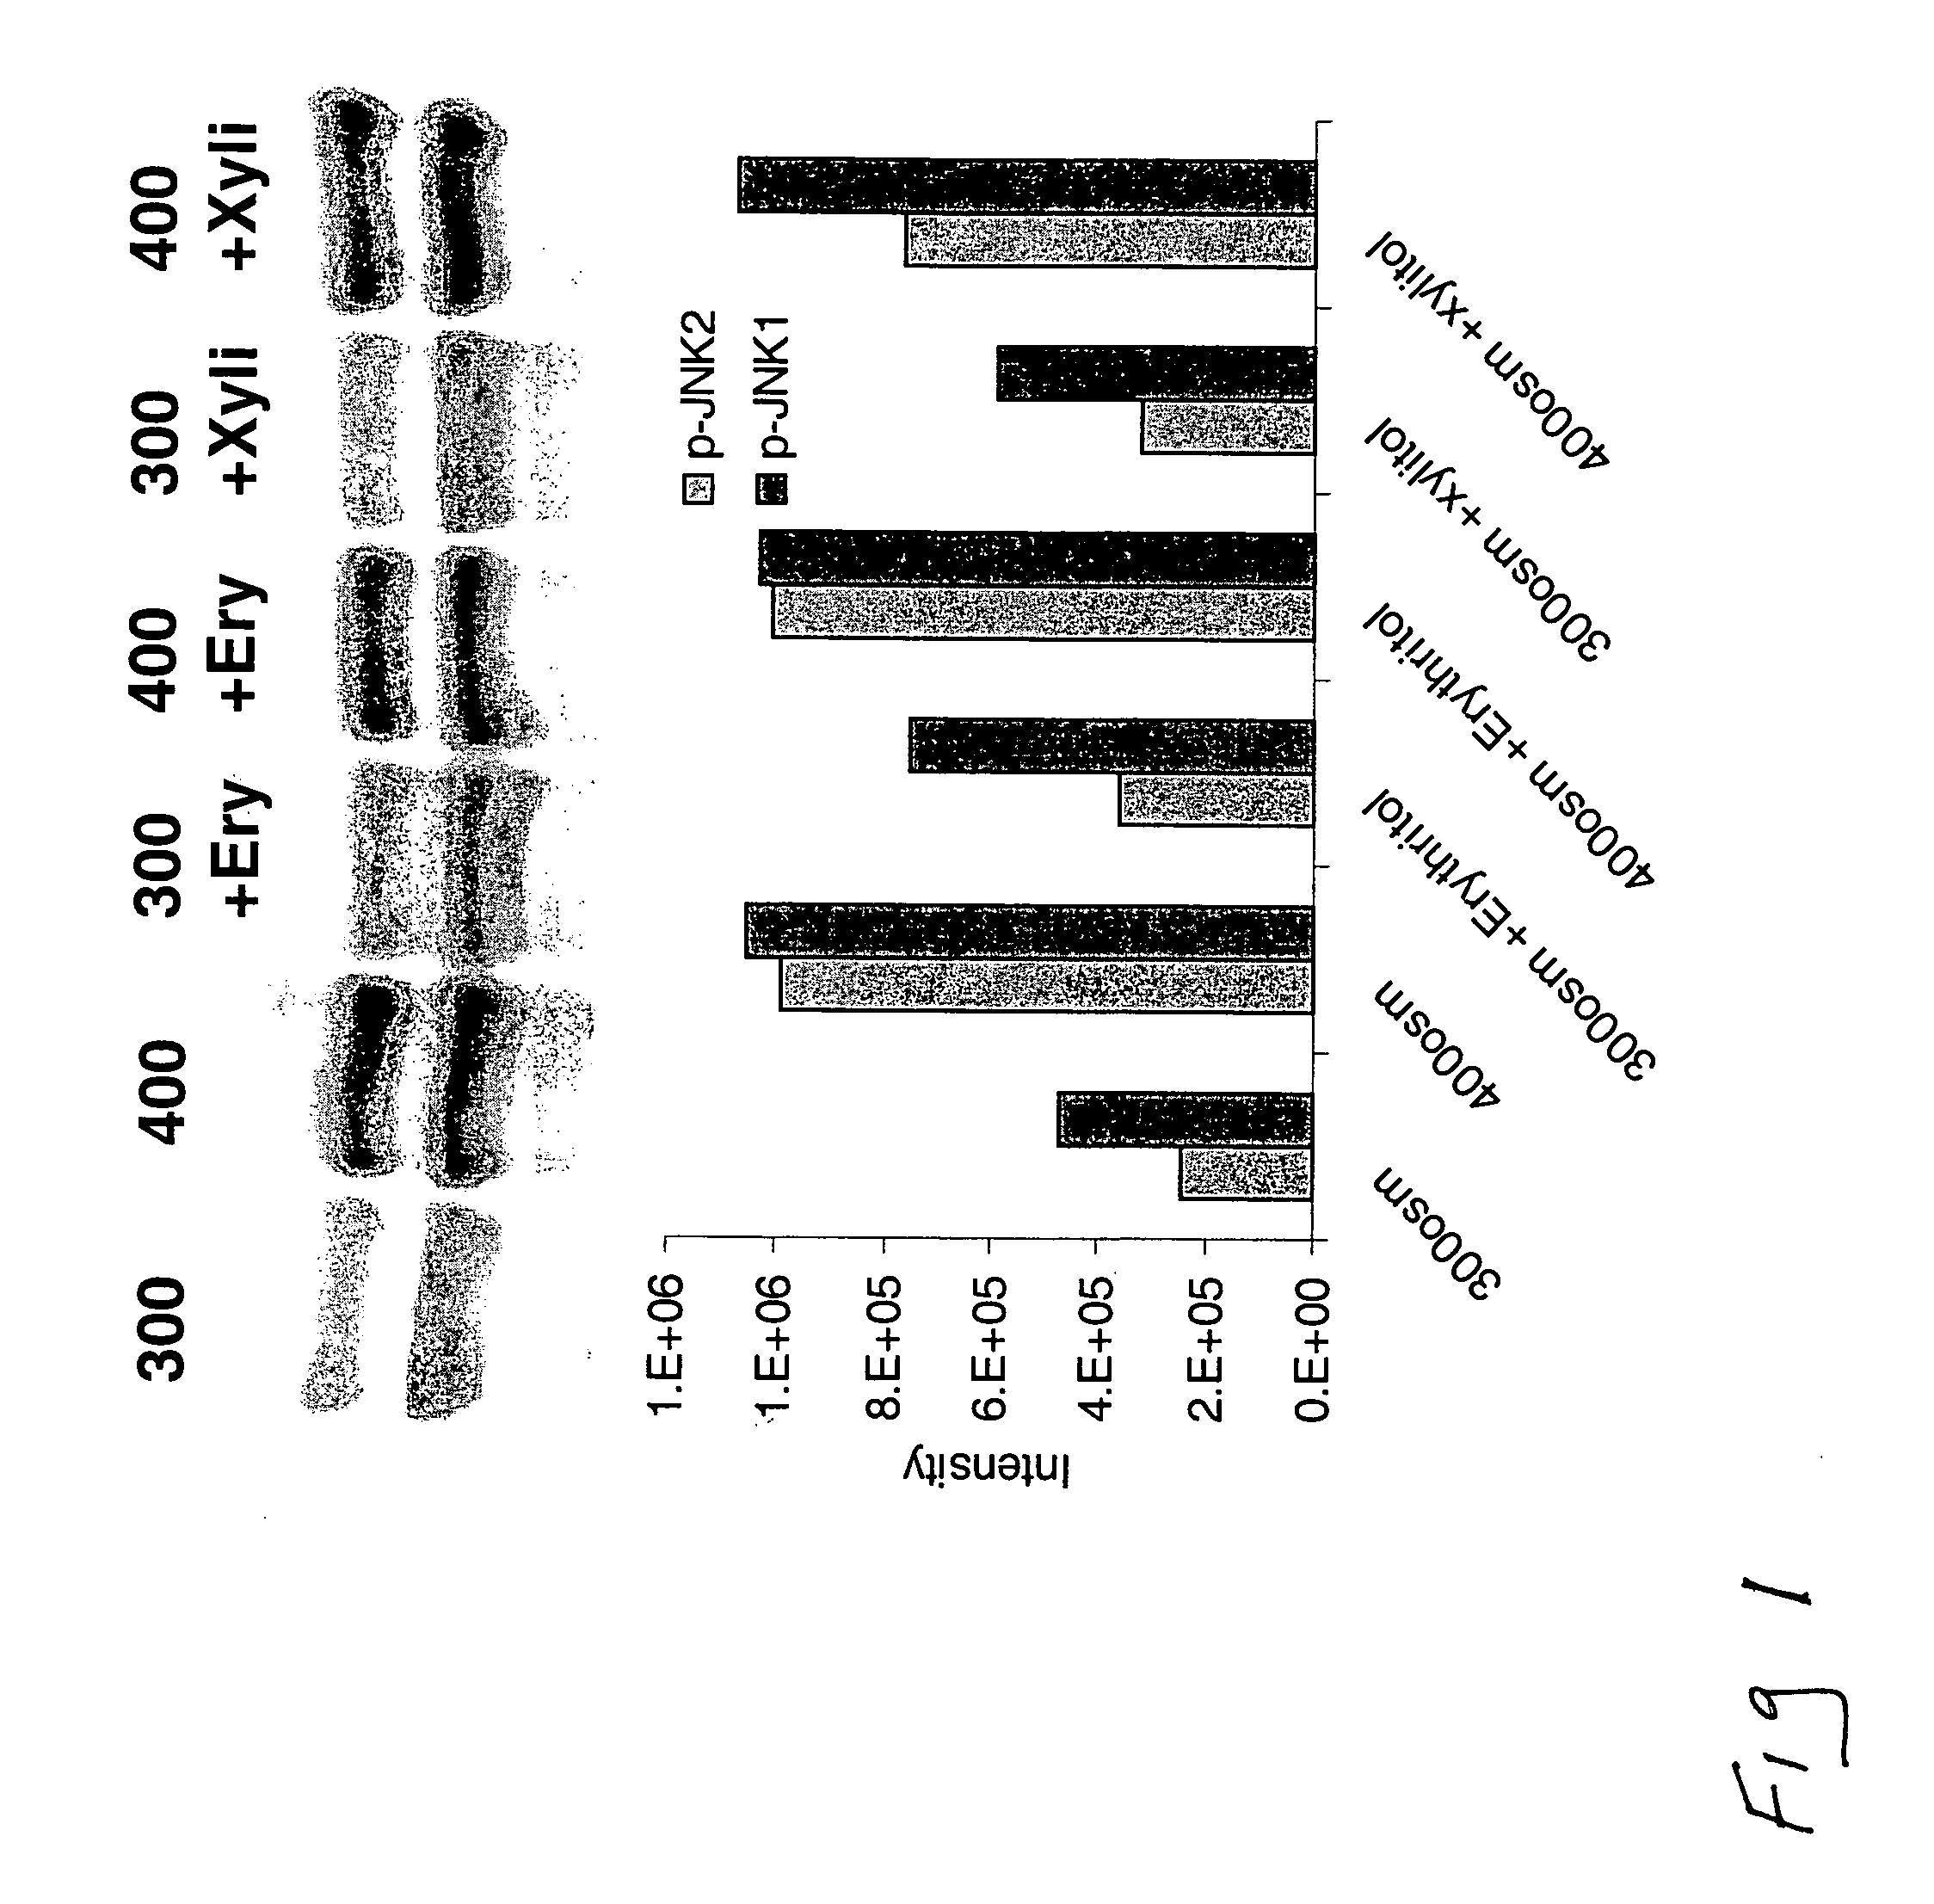 Ophthalmic compositions and methods for treating eyes